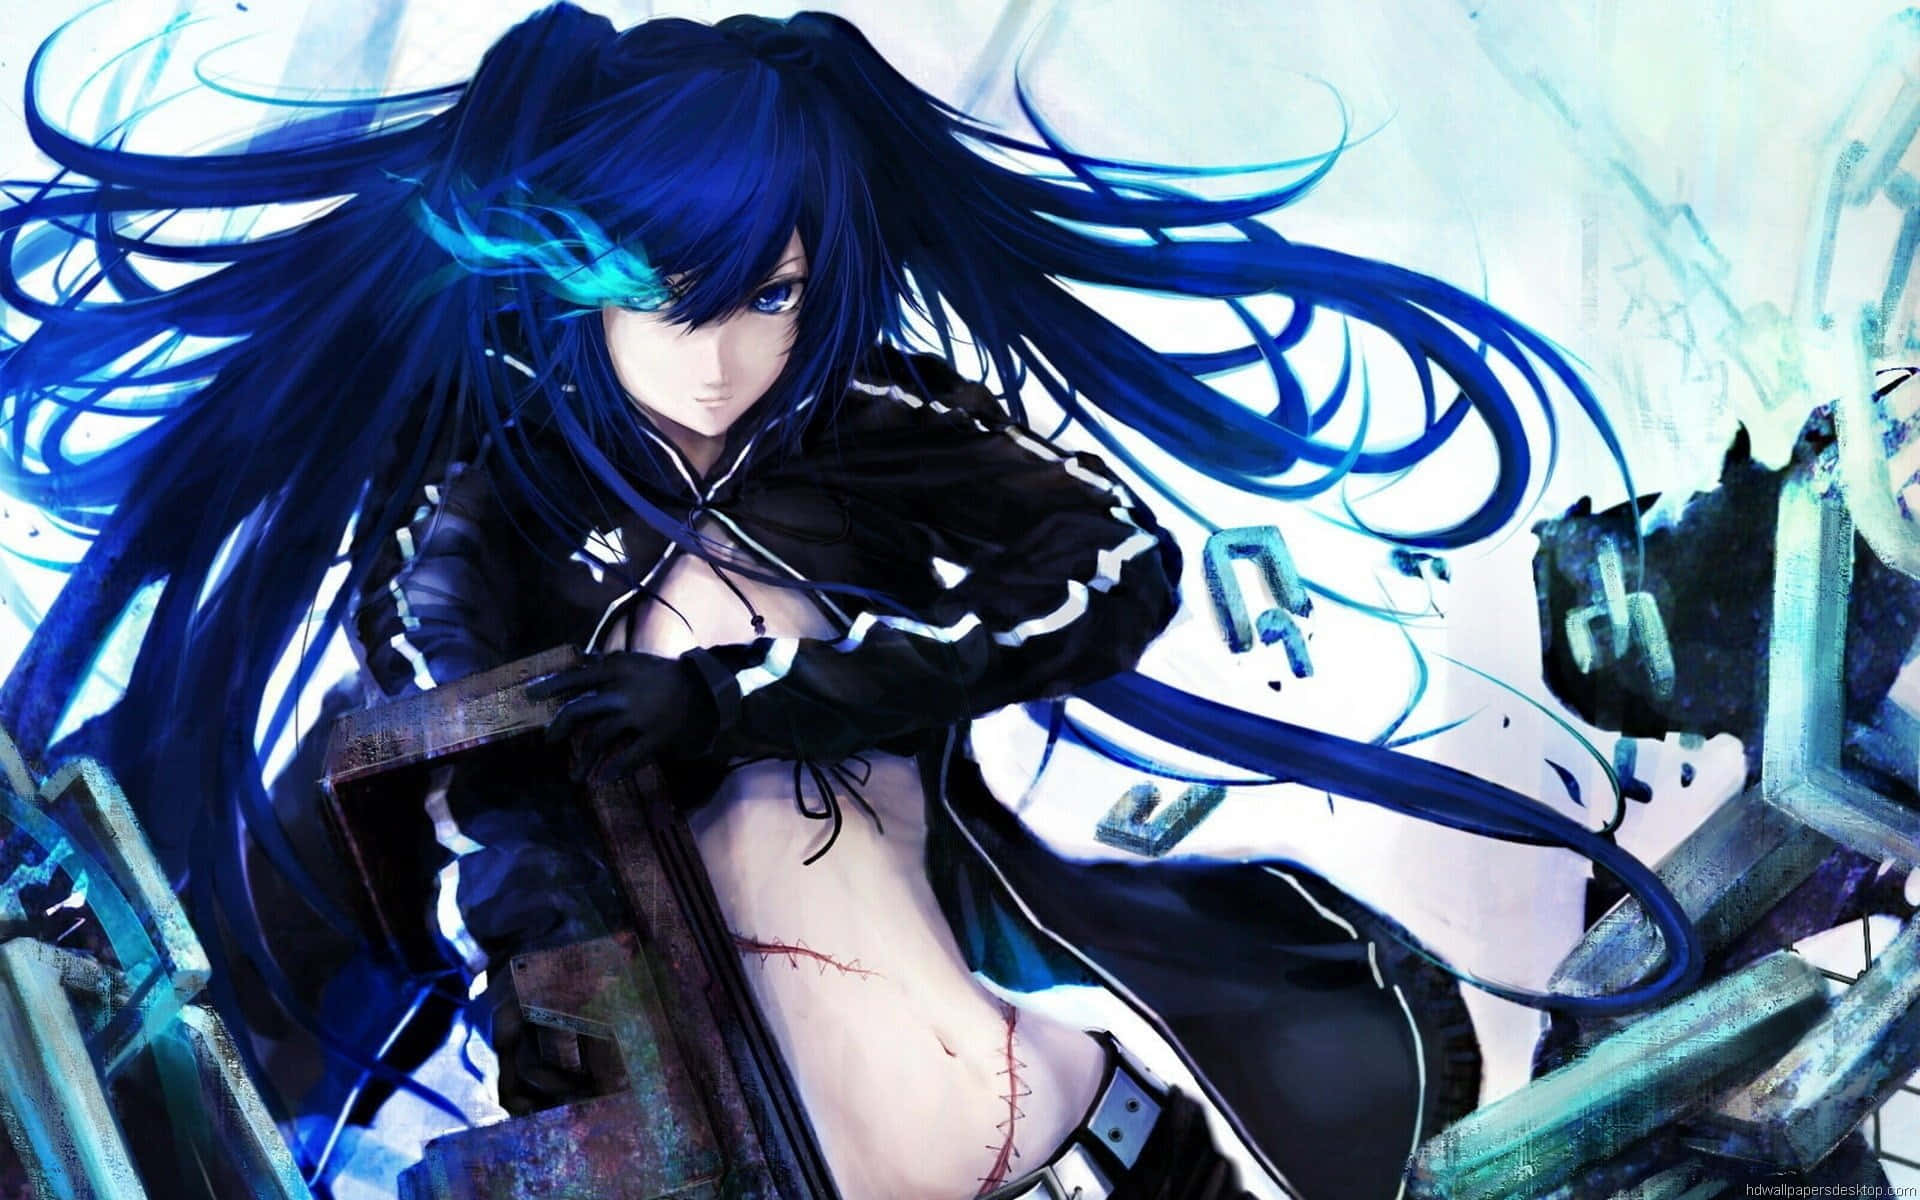 A young anime girl with dark blue hair and a mysterious gaze.